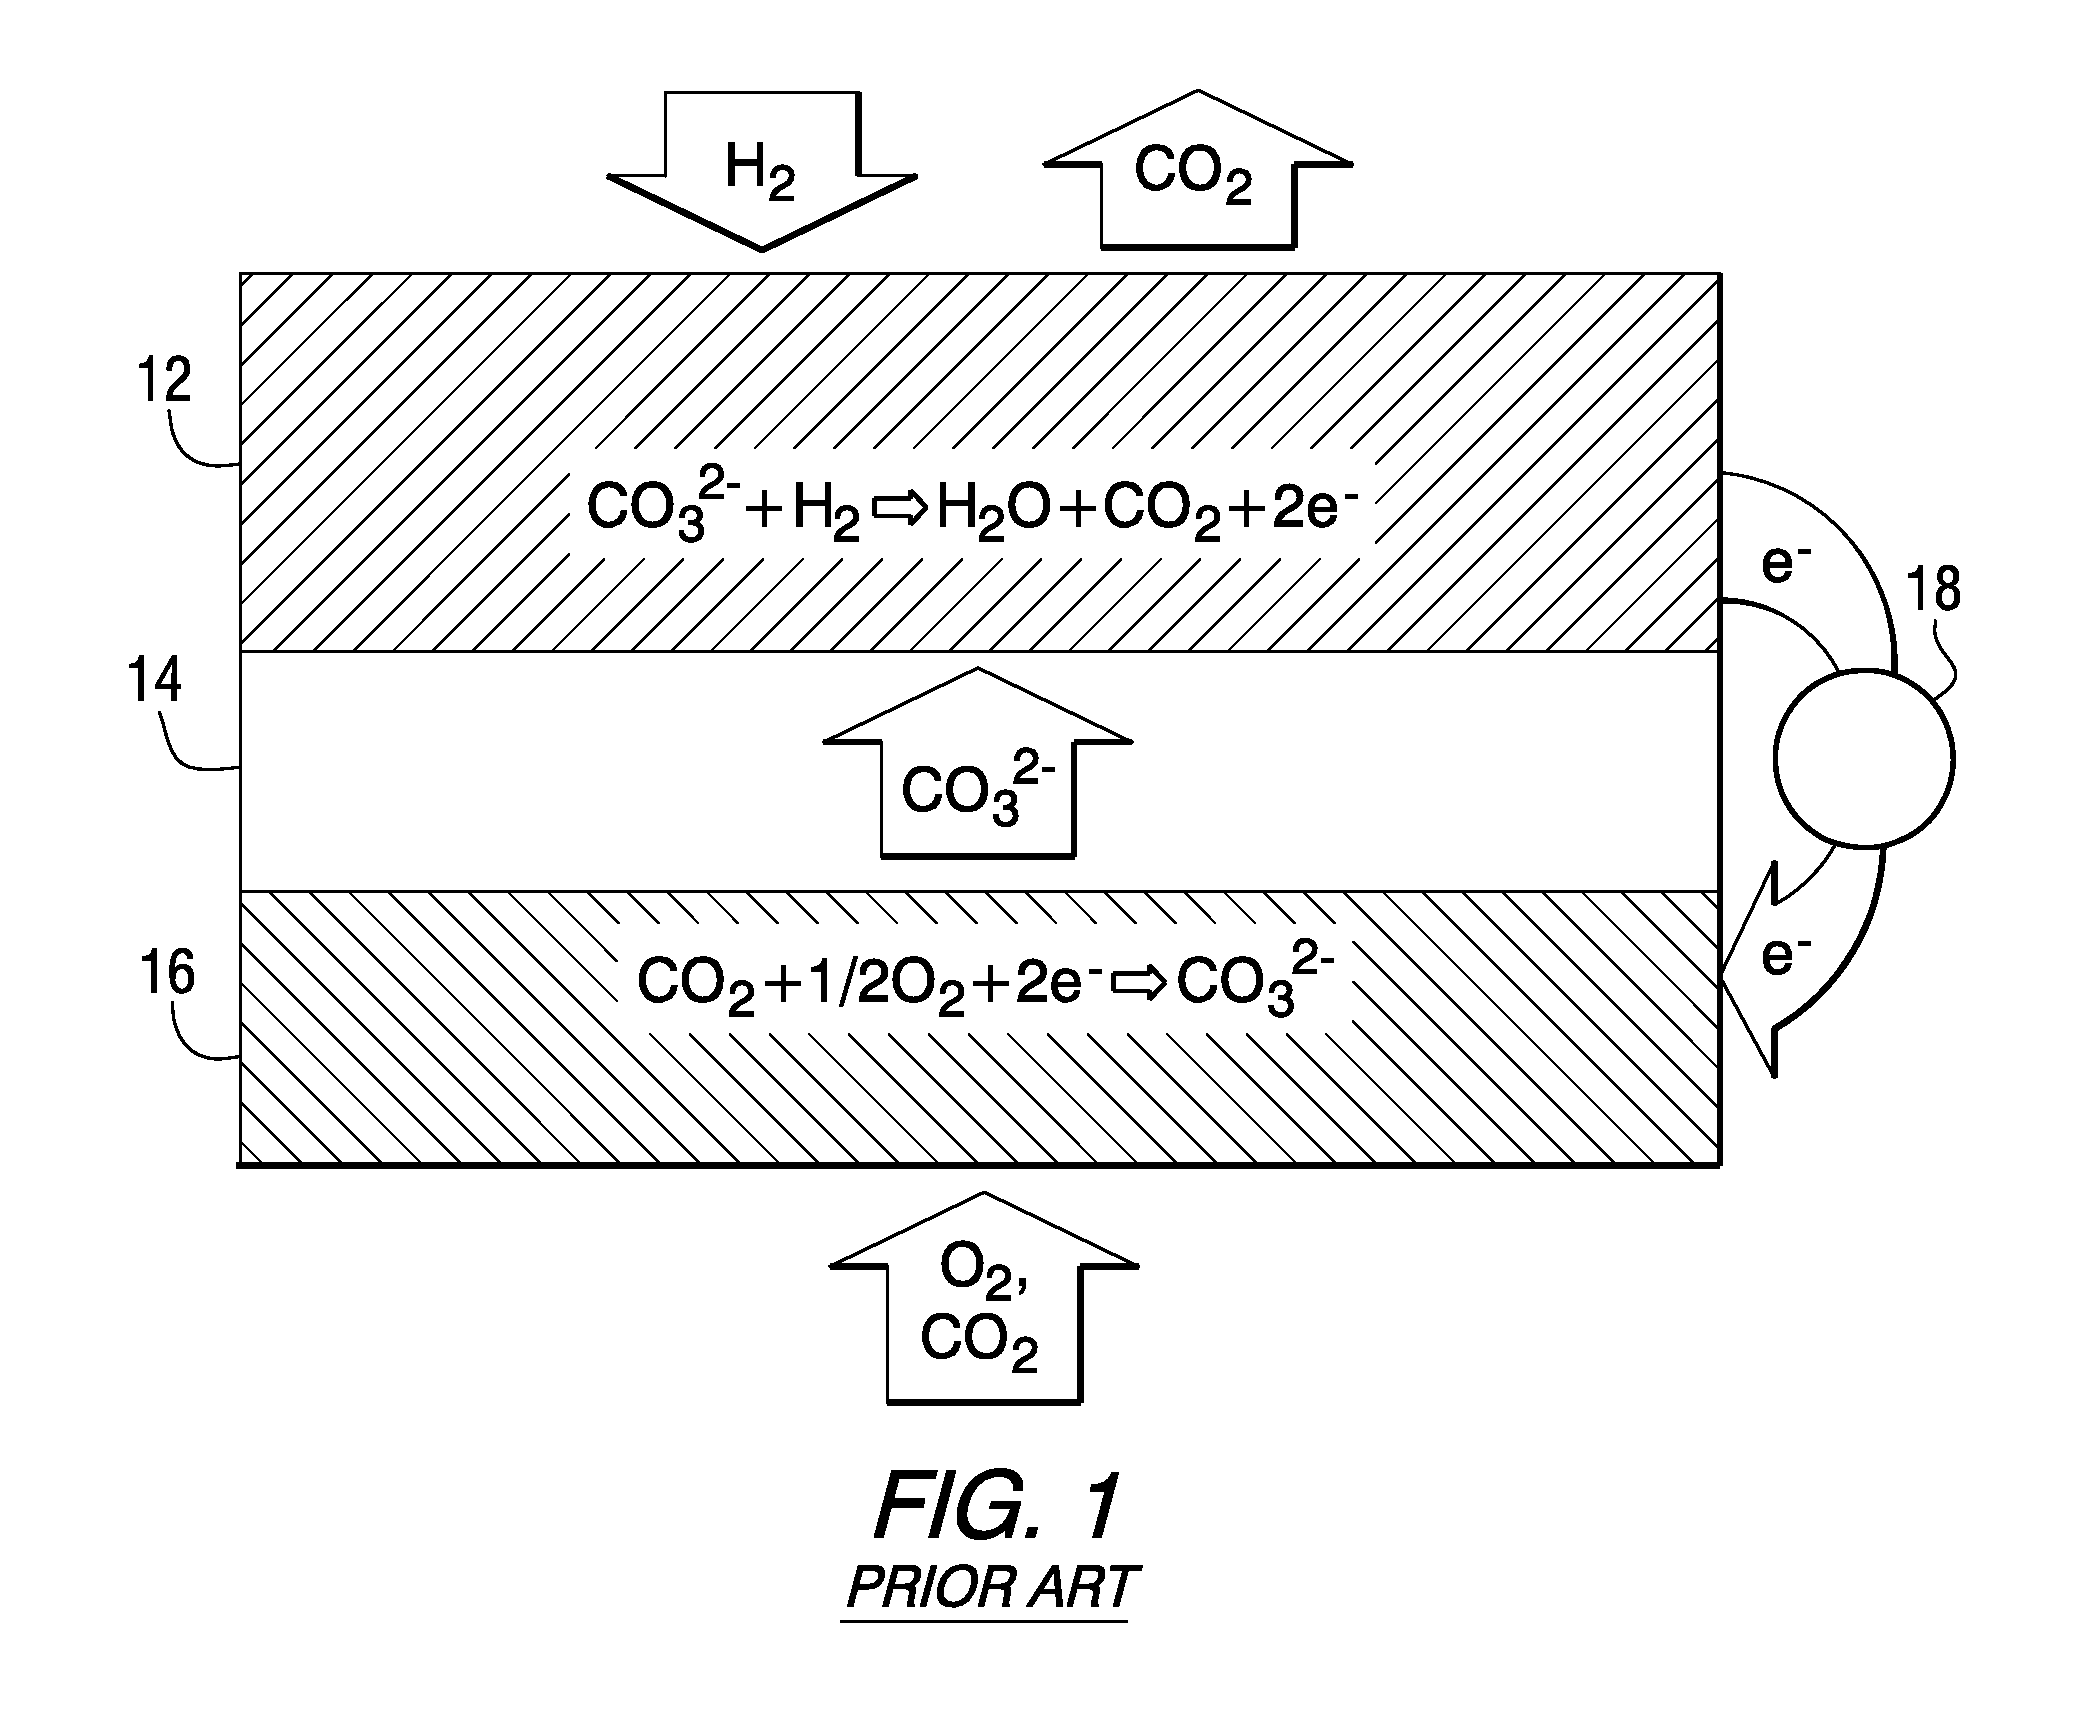 Rechargeable anion battery cell using a molten salt electrolyte